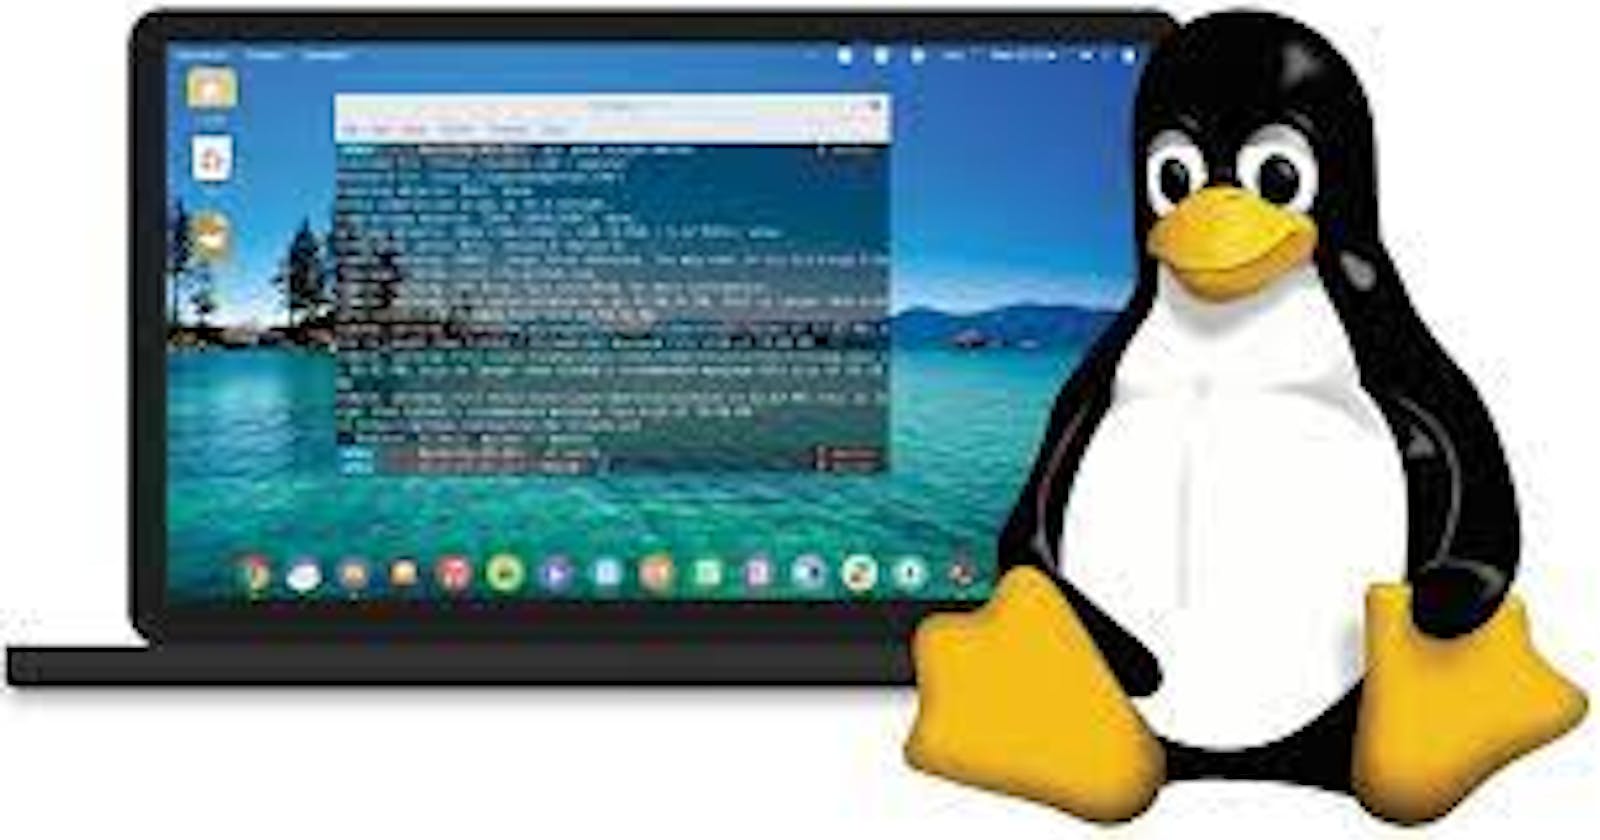 Commonly Used Linux Commands: File, Searching, System Information, and Networking Commands